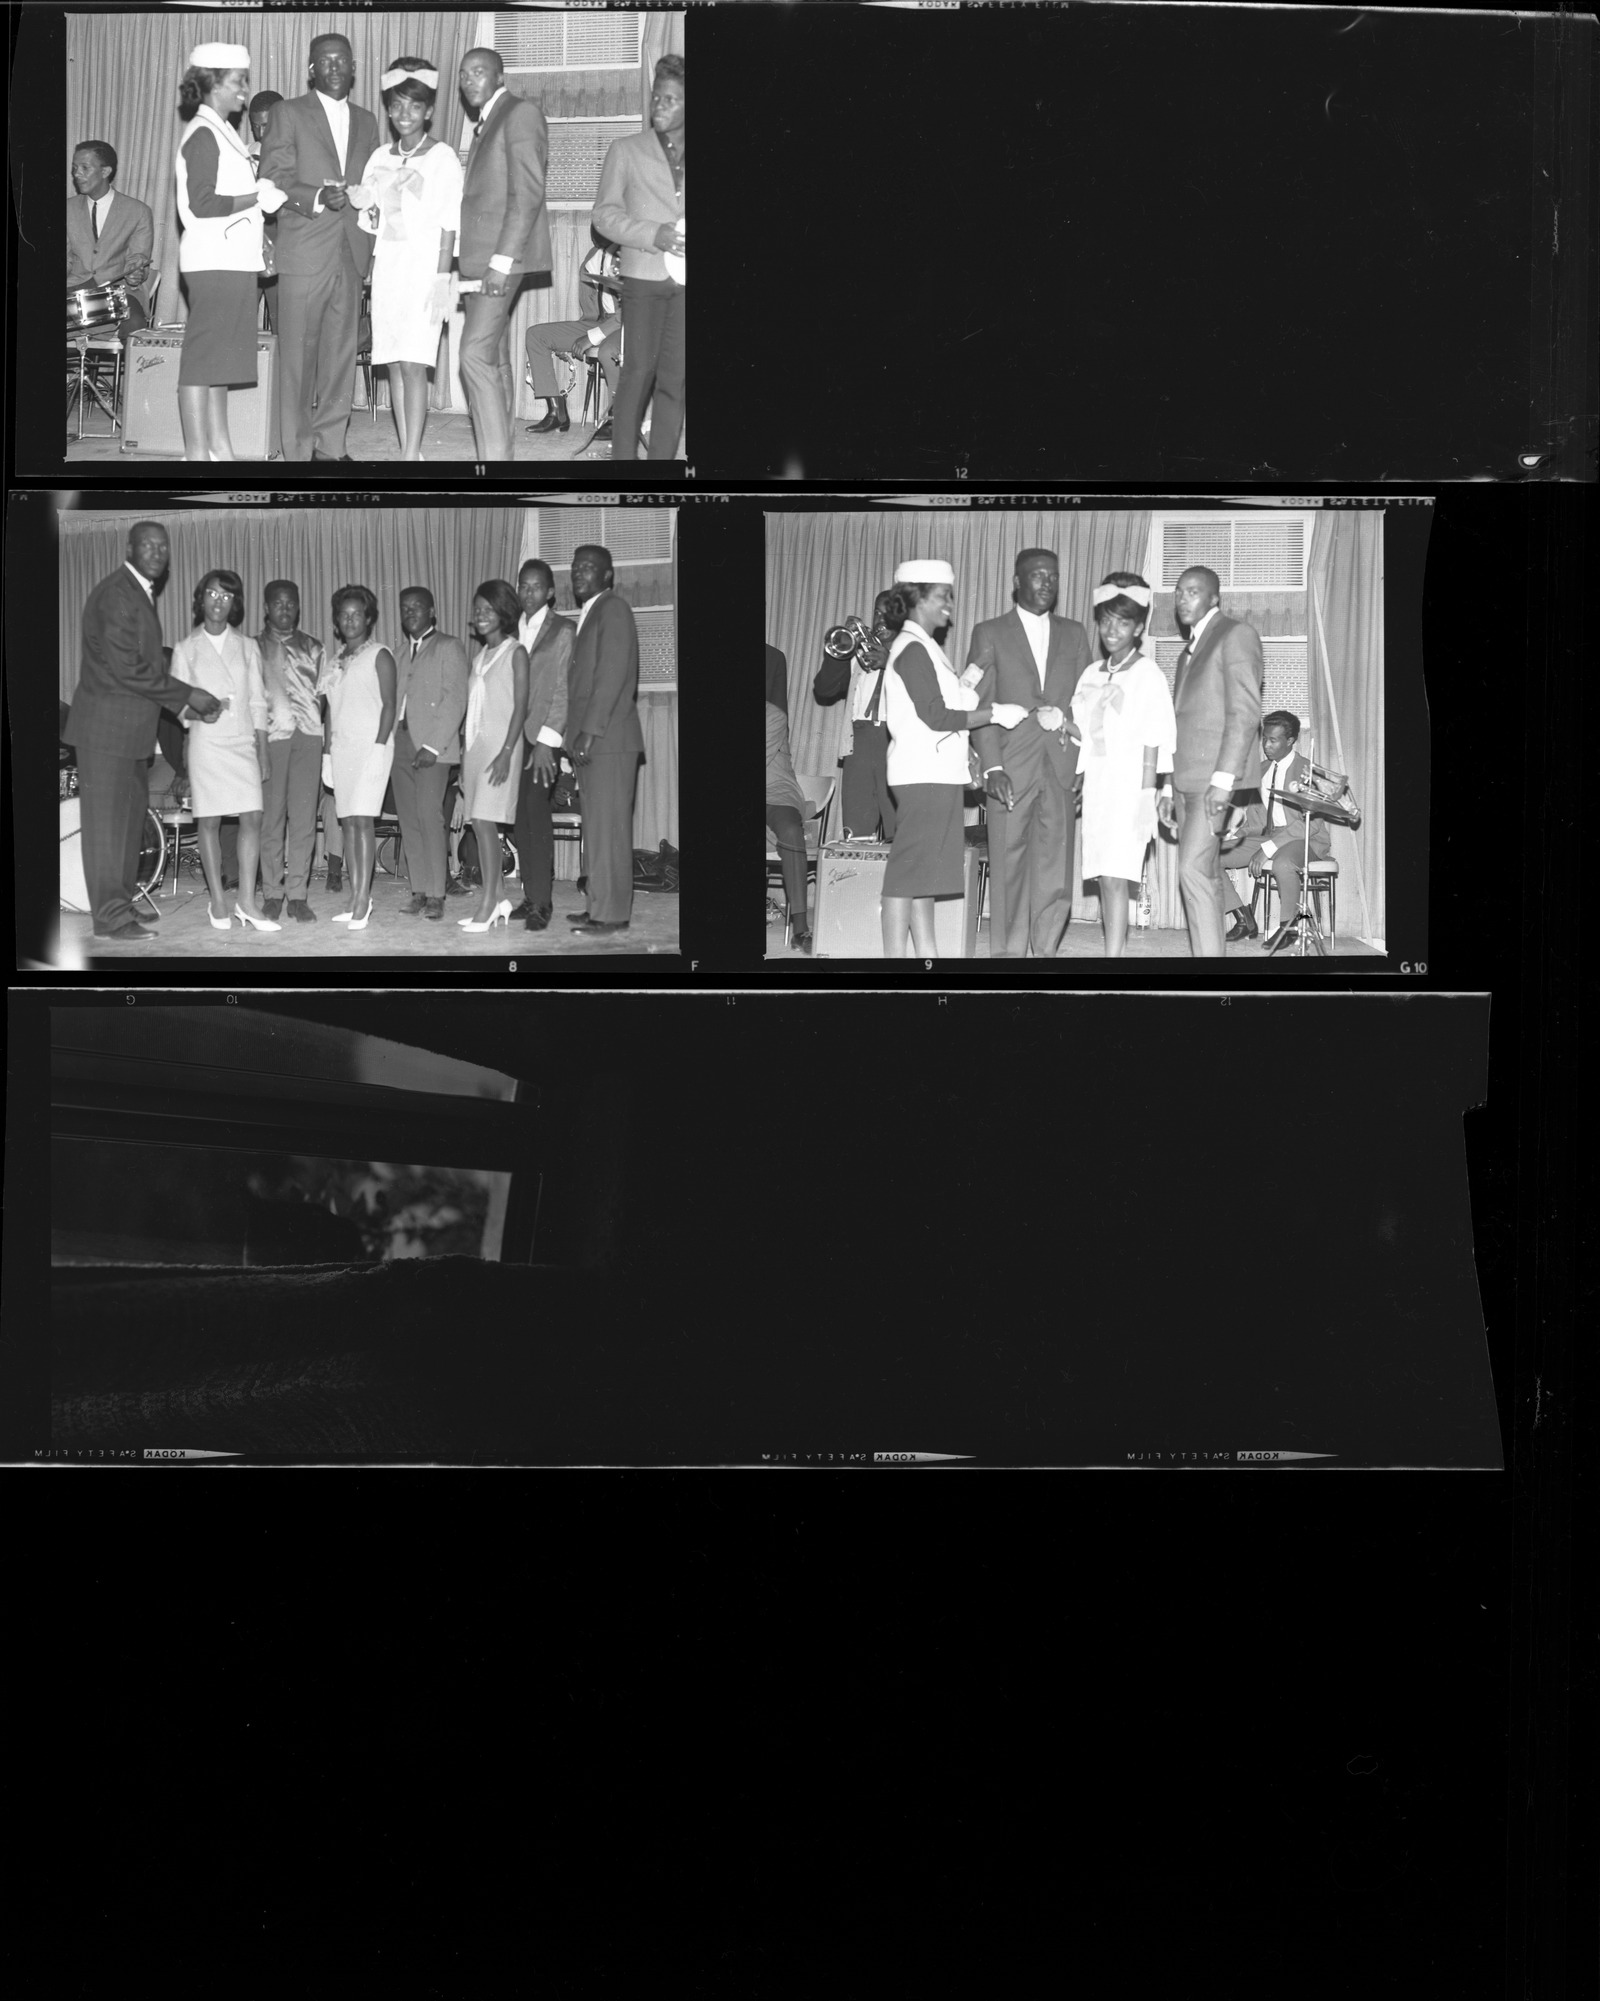 Set of negatives by Clinton Wright including Easter Parade at Rubens, L.T. Mason at Doolittle and Malvern, bunny hop at El Morocco, Mr. and Mrs. Simmons at 308 Jackson, and girls dying eggs at Doolittle, 1965, page 1